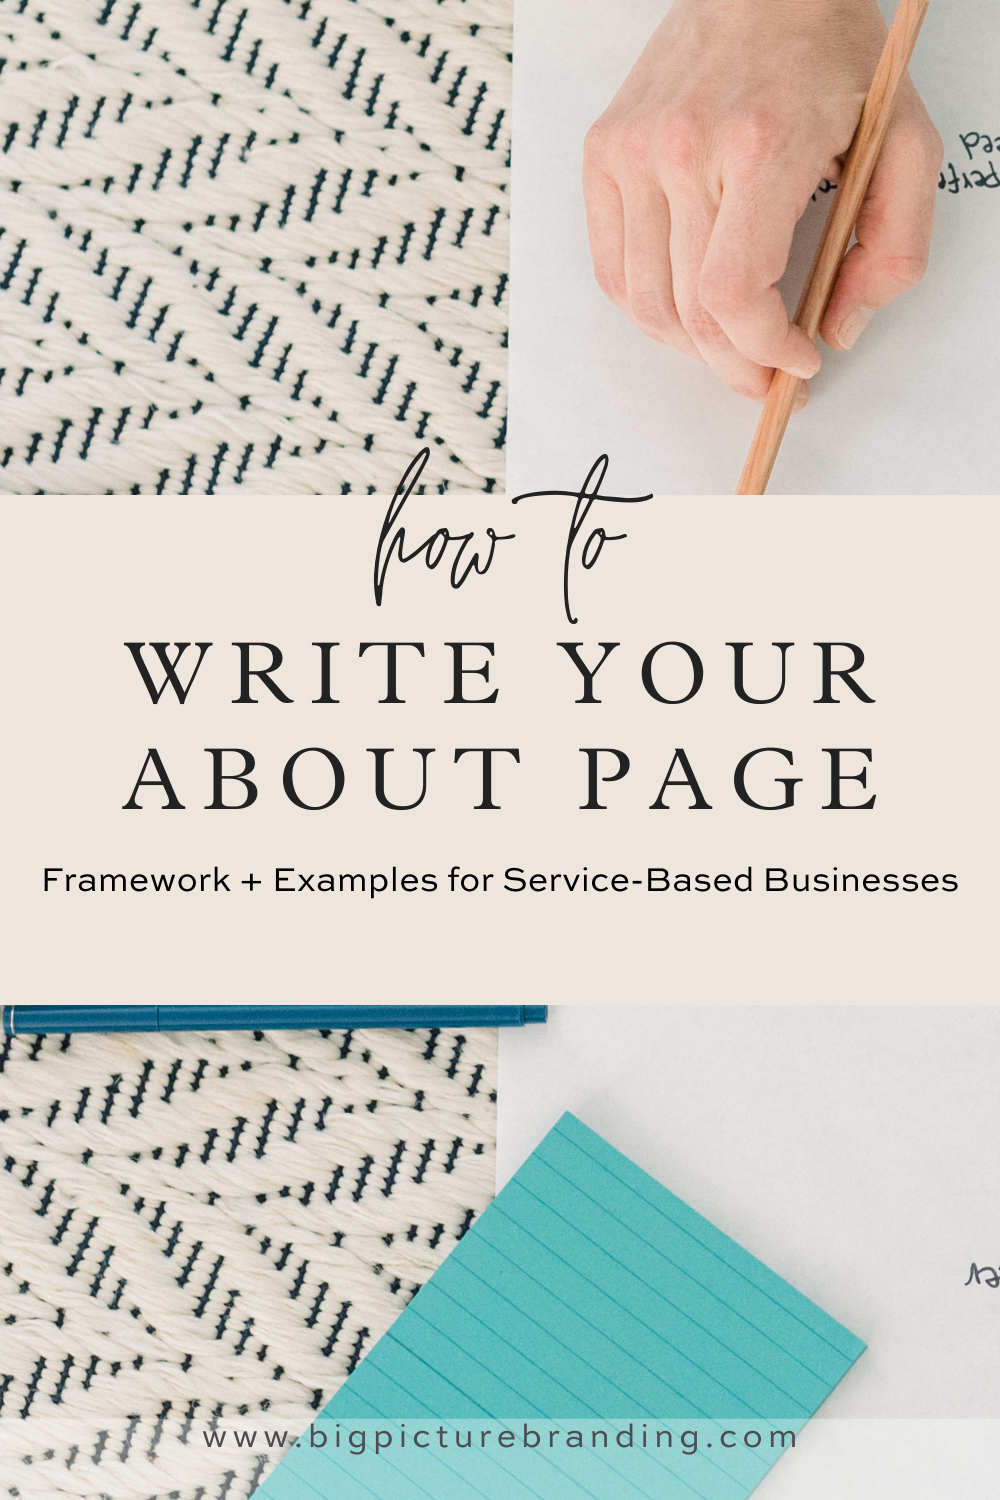 How to write your about page framework and examples